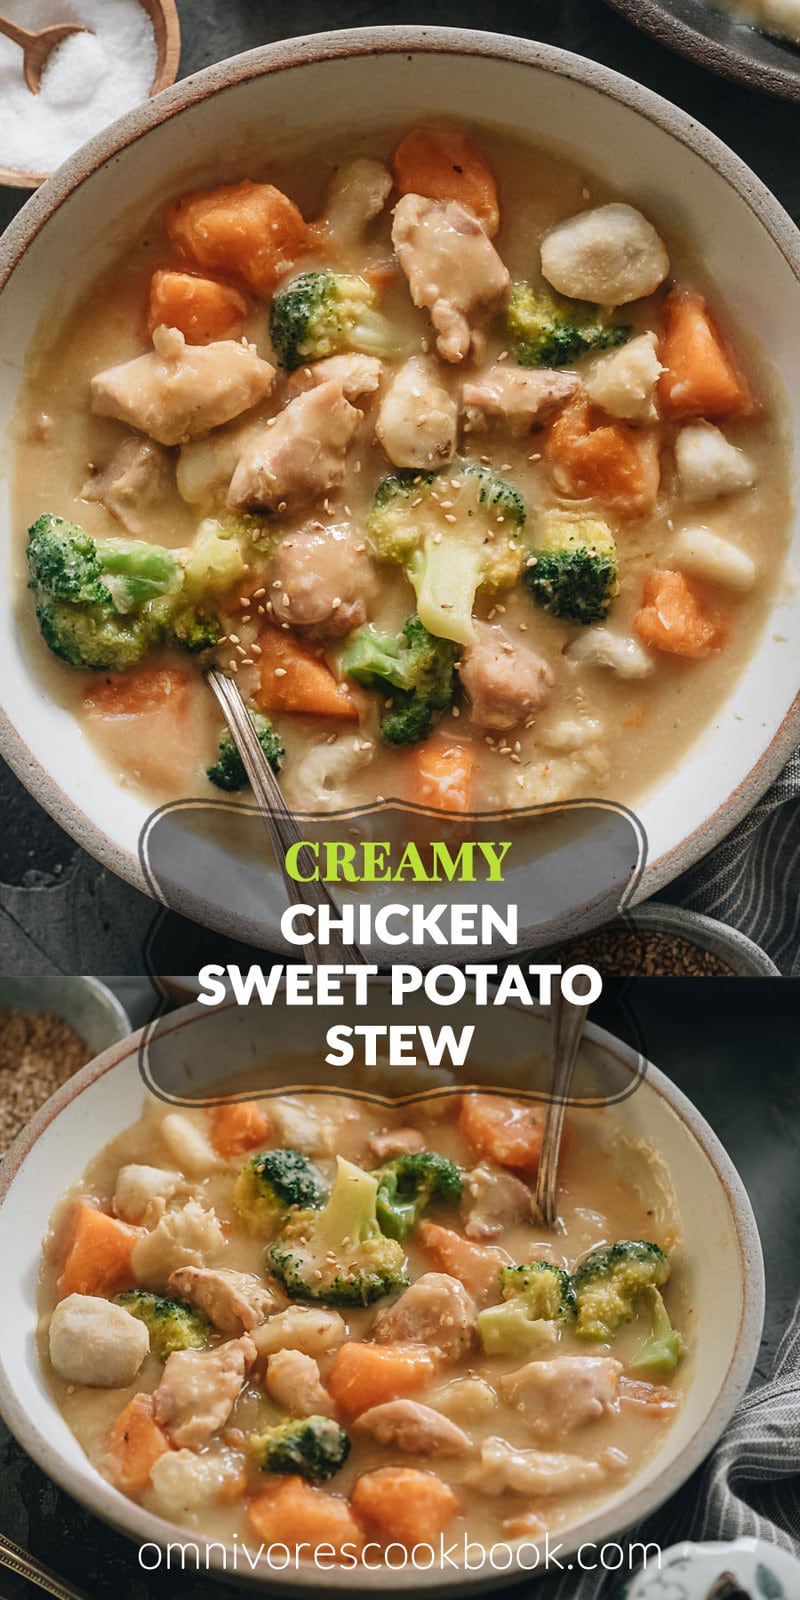 Creamy Chicken Sweet Potato Stew | This easy chicken sweet potato stew is a perfect one-pot dinner for a busy weeknight. Juicy chicken, tender root veggies, and crisp broccoli are cooked in a creamy, gingery sauce. It is easy to prepare, tastes so hearty, and is packed with nutrition. {Gluten-Free Adaptable}